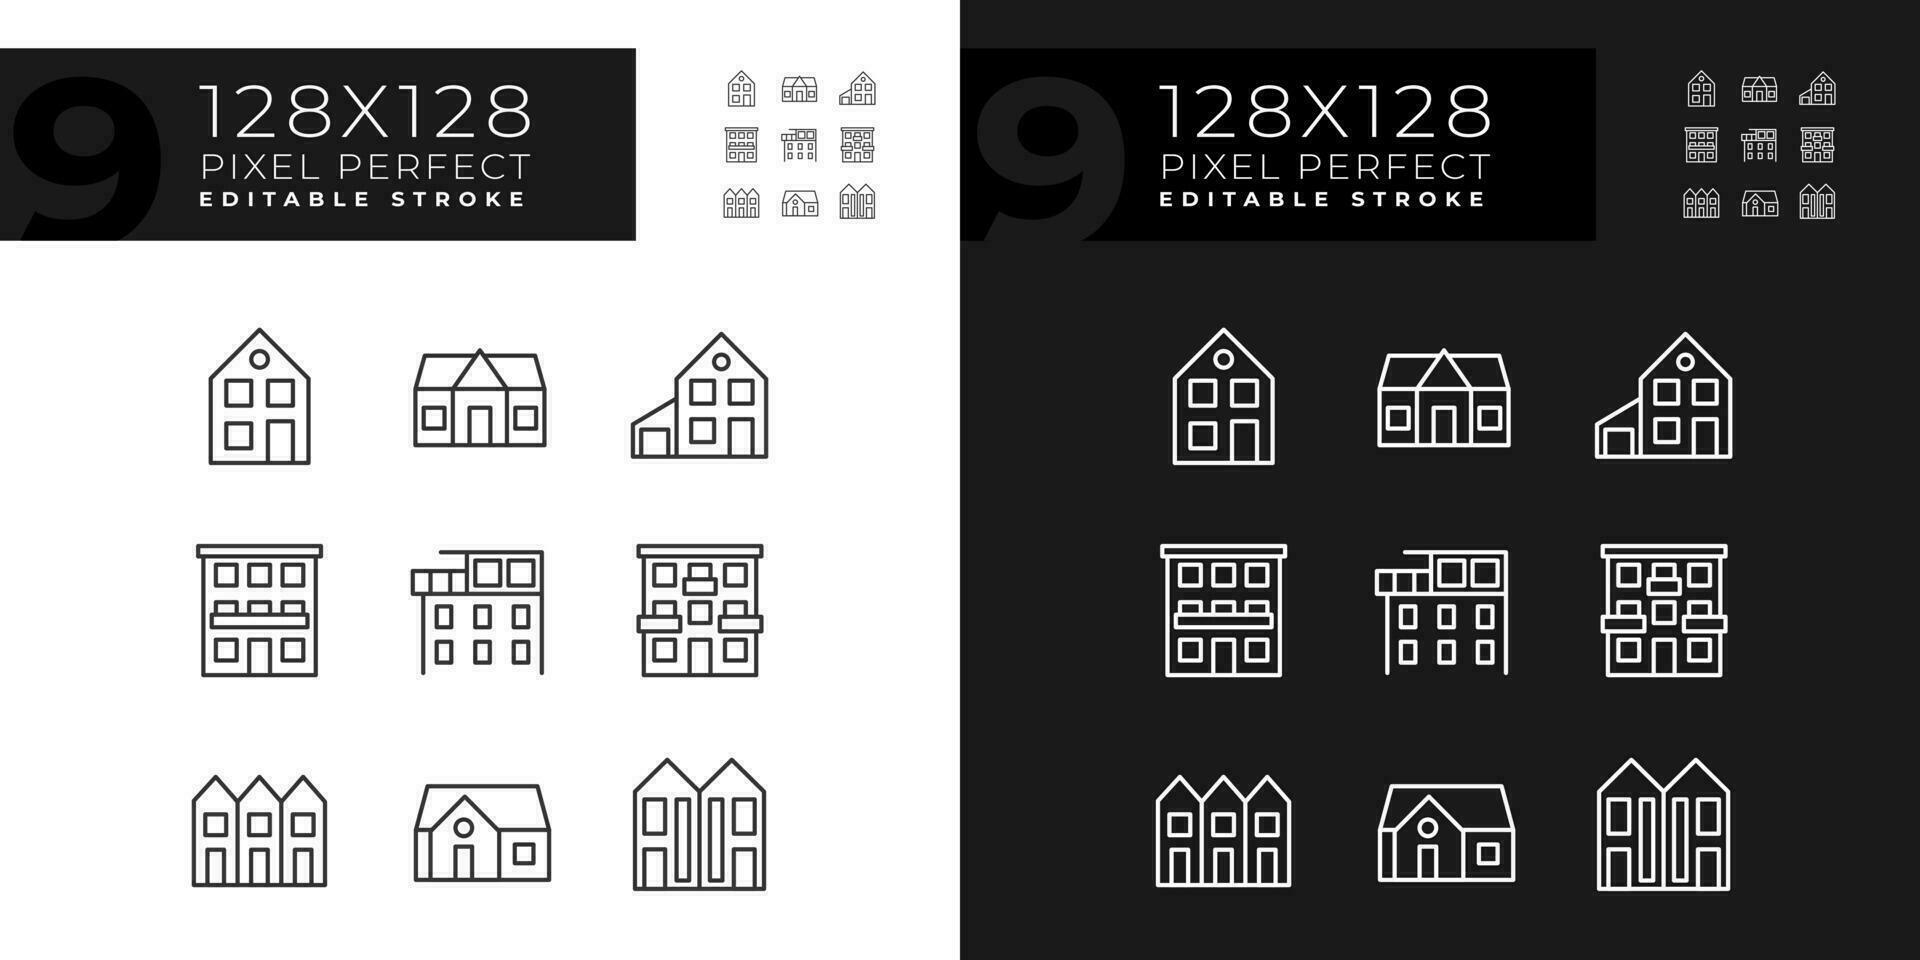 Property purchase pixel perfect linear icons set for dark, light mode. Real estate agency. Apartments. Luxury property. Thin line symbols for night, day theme. Isolated illustrations. Editable stroke vector